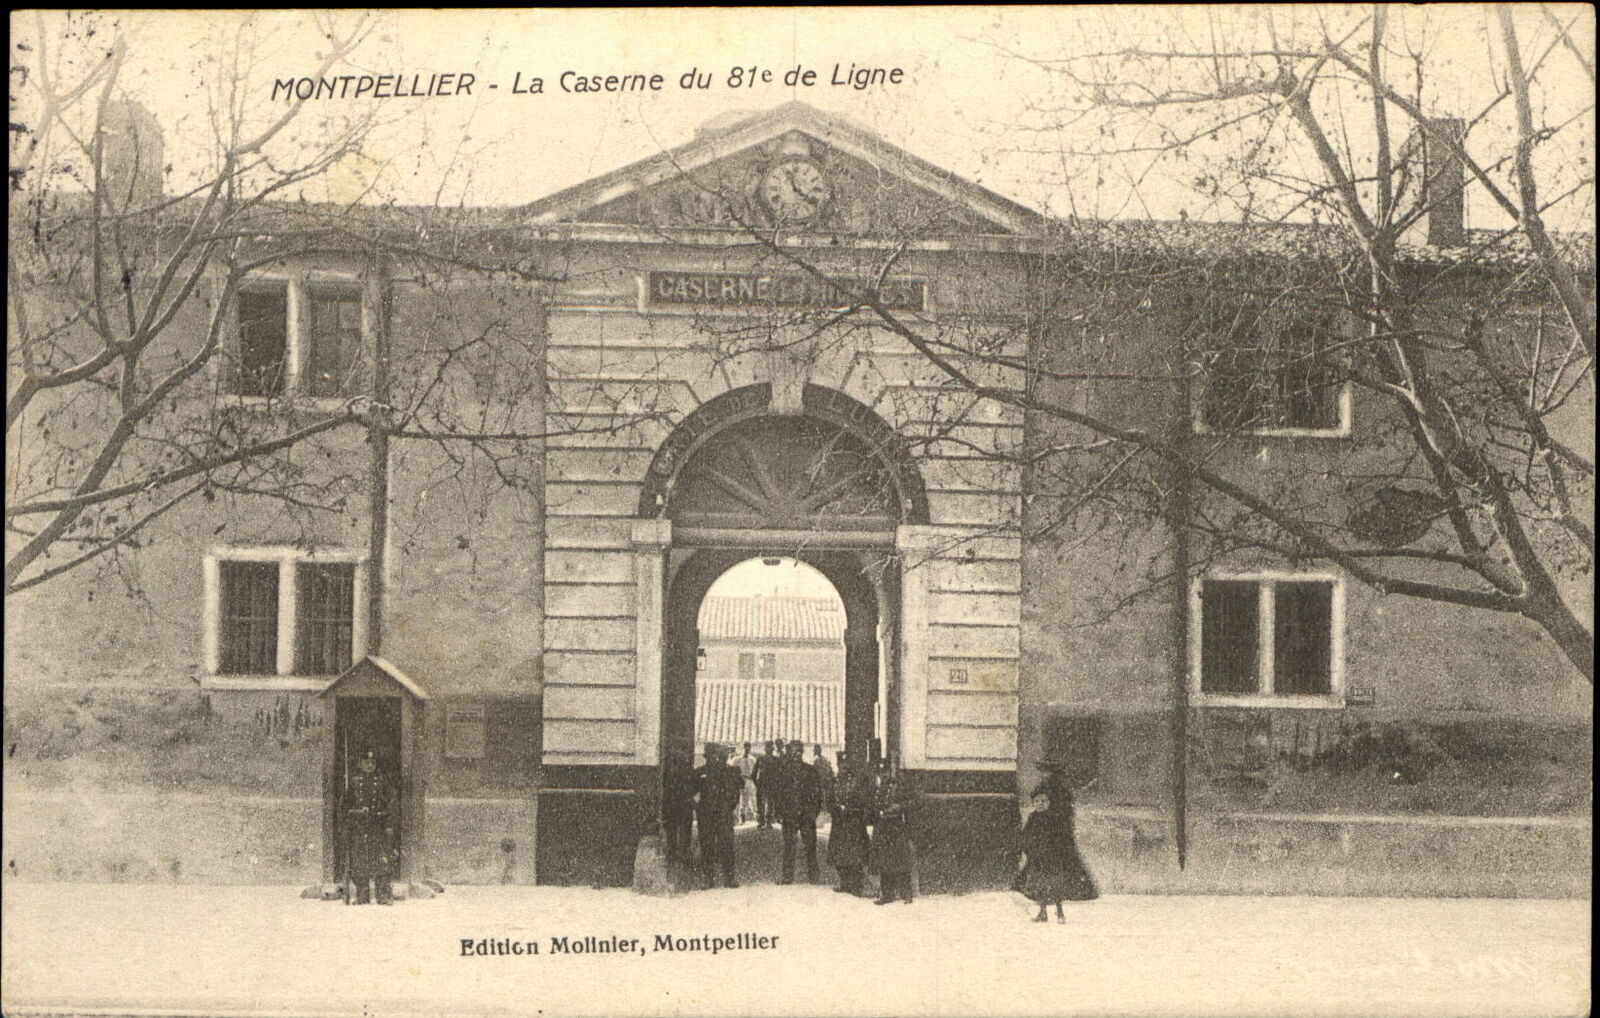 Montpellier France ~ Troop Barracks of the 81st of the Line ~ 1910 pre-WWI